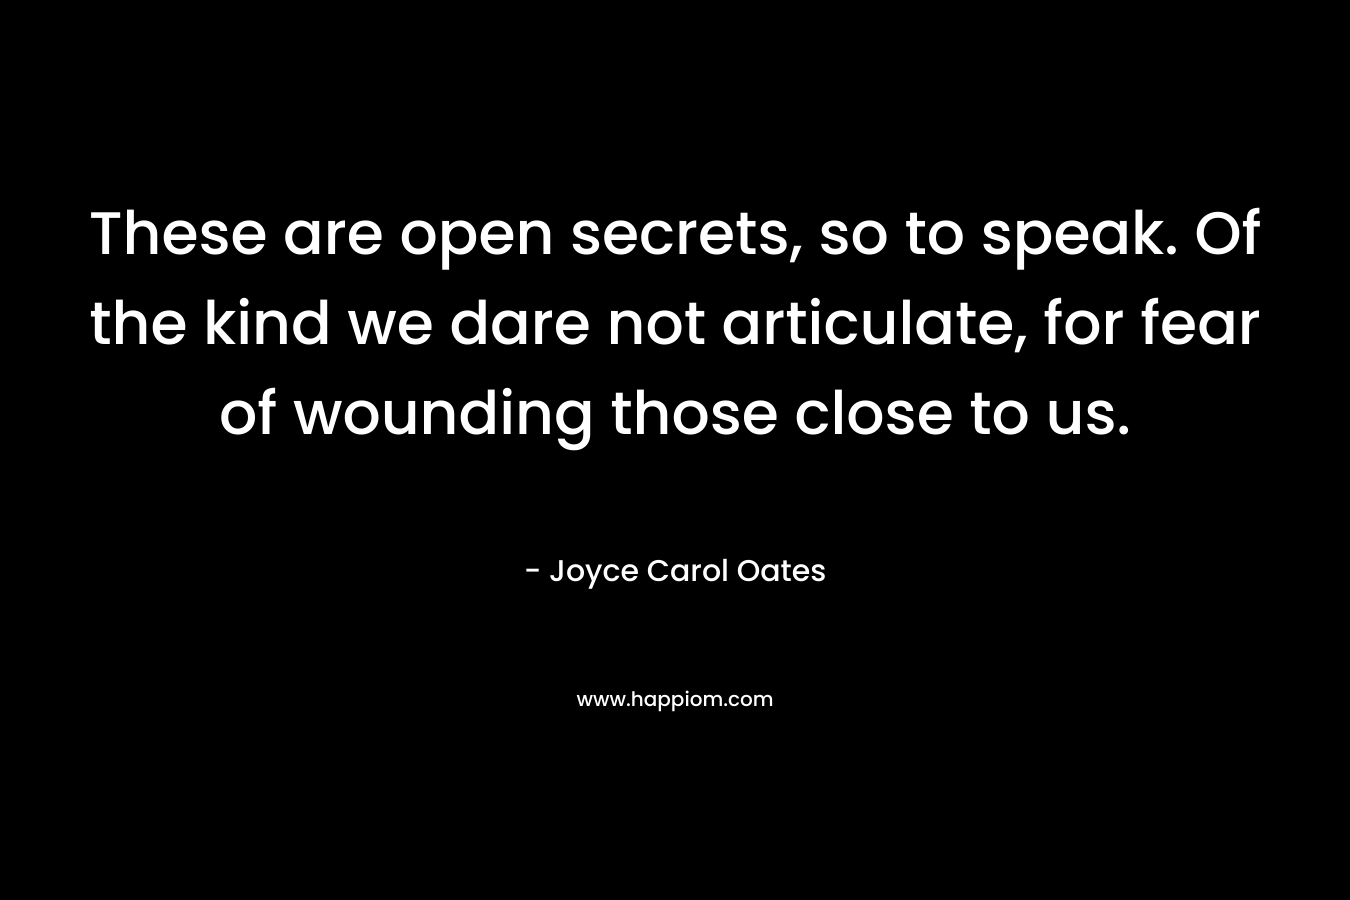 These are open secrets, so to speak. Of the kind we dare not articulate, for fear of wounding those close to us.